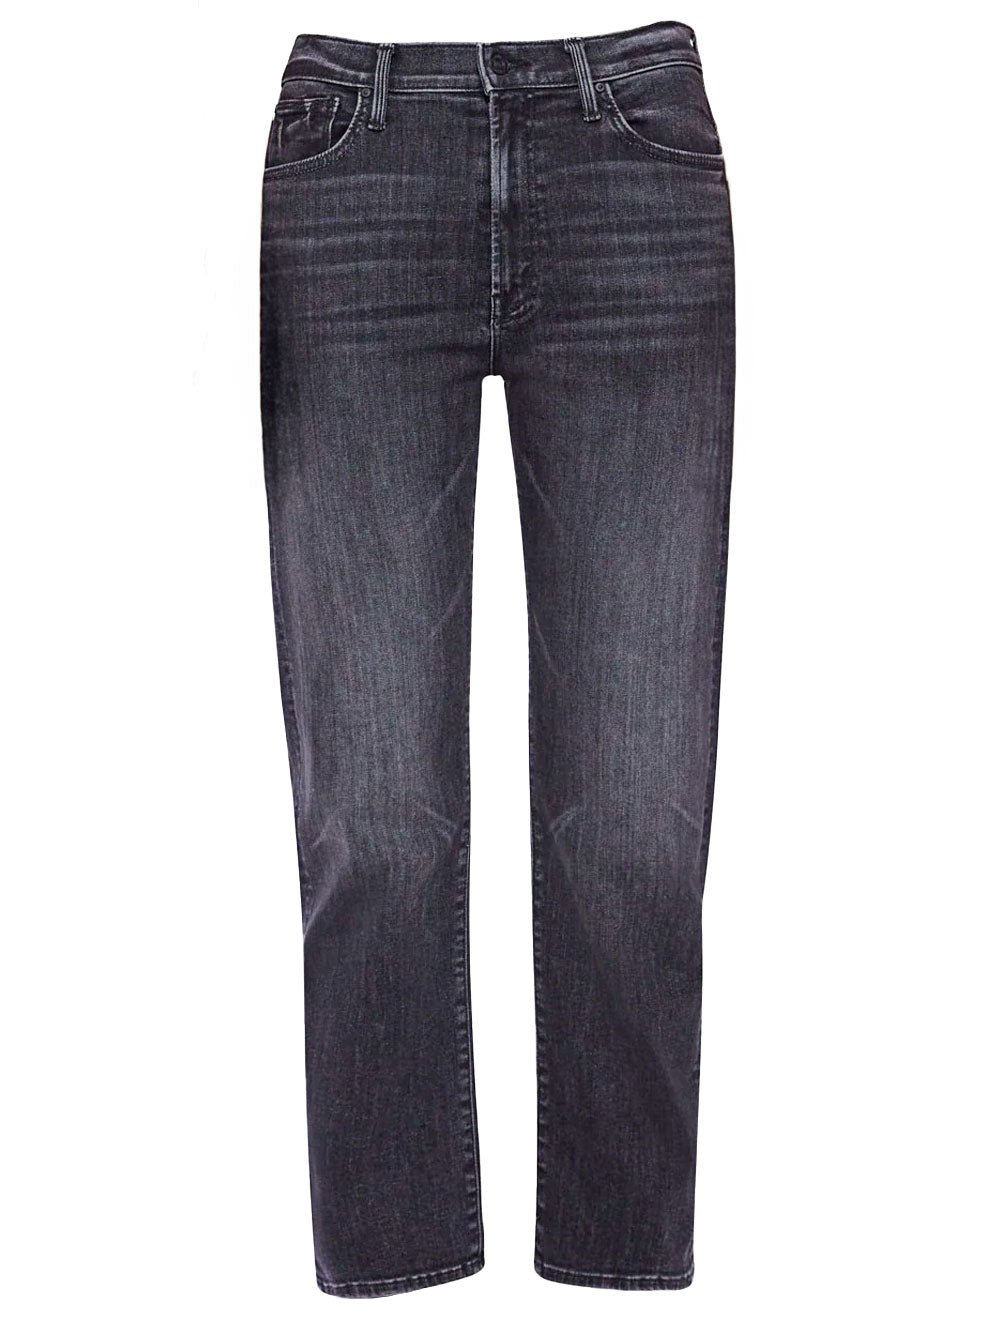 The Ditcher Zip Ankle jeans